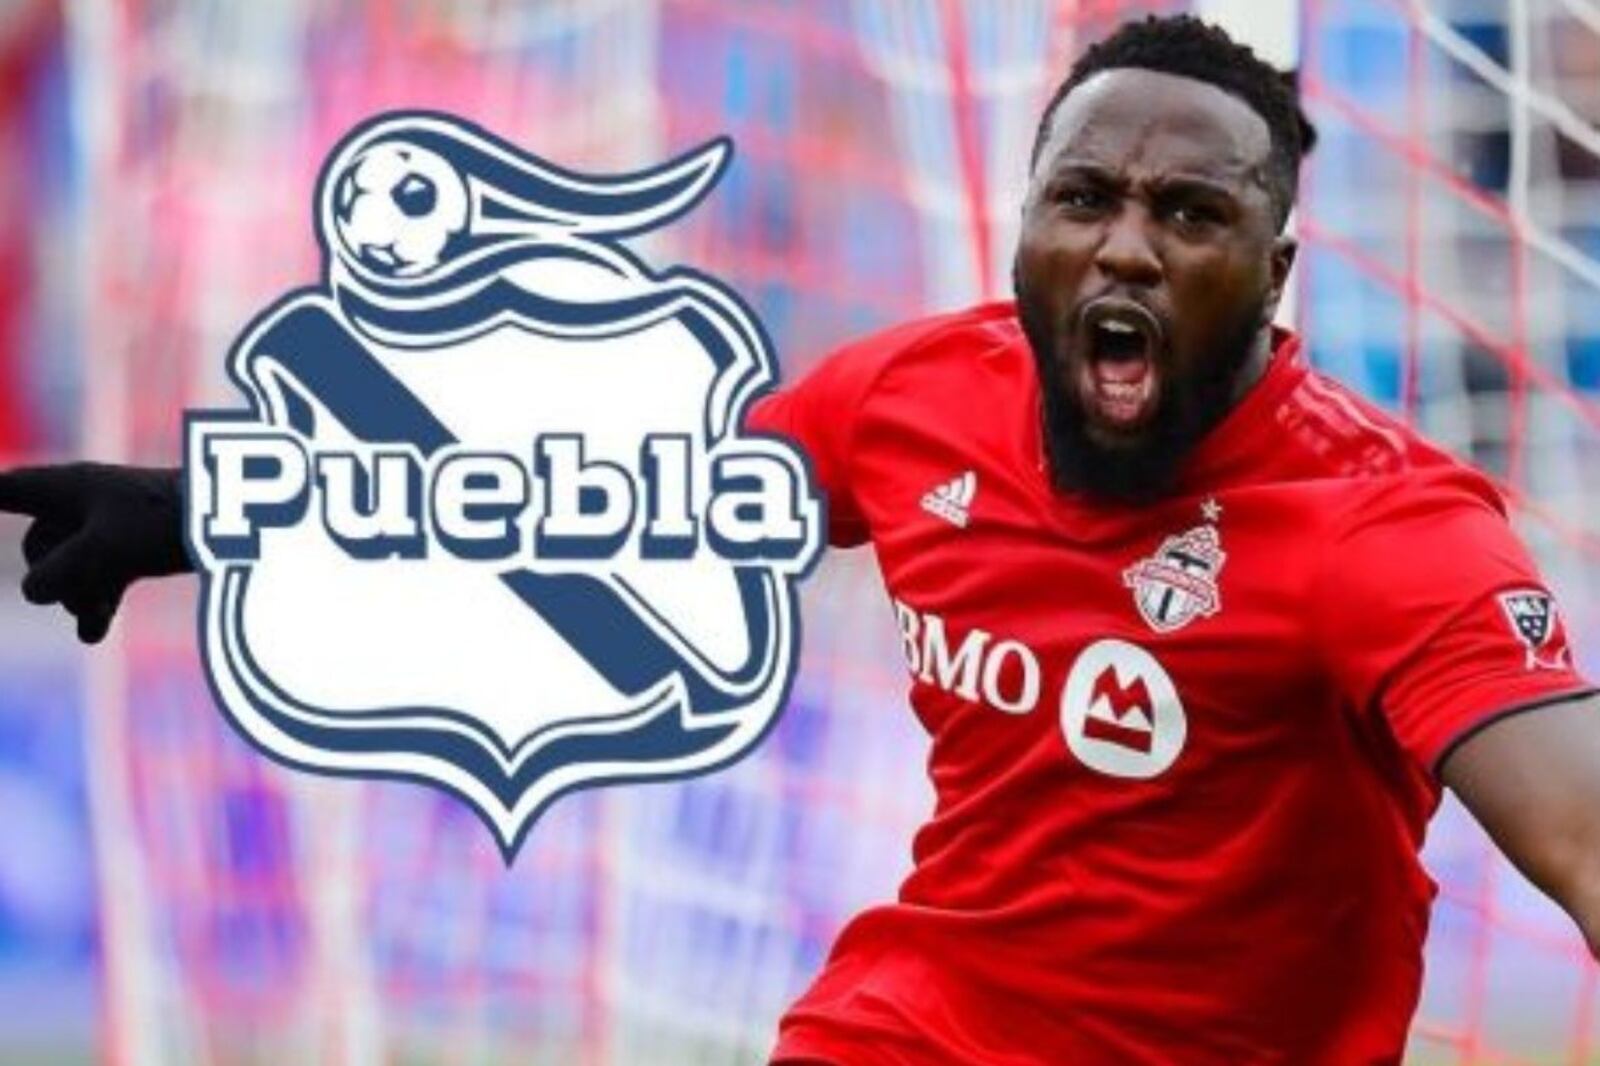 Puebla will sign Jozy Altidore but this striker lives a sad reality